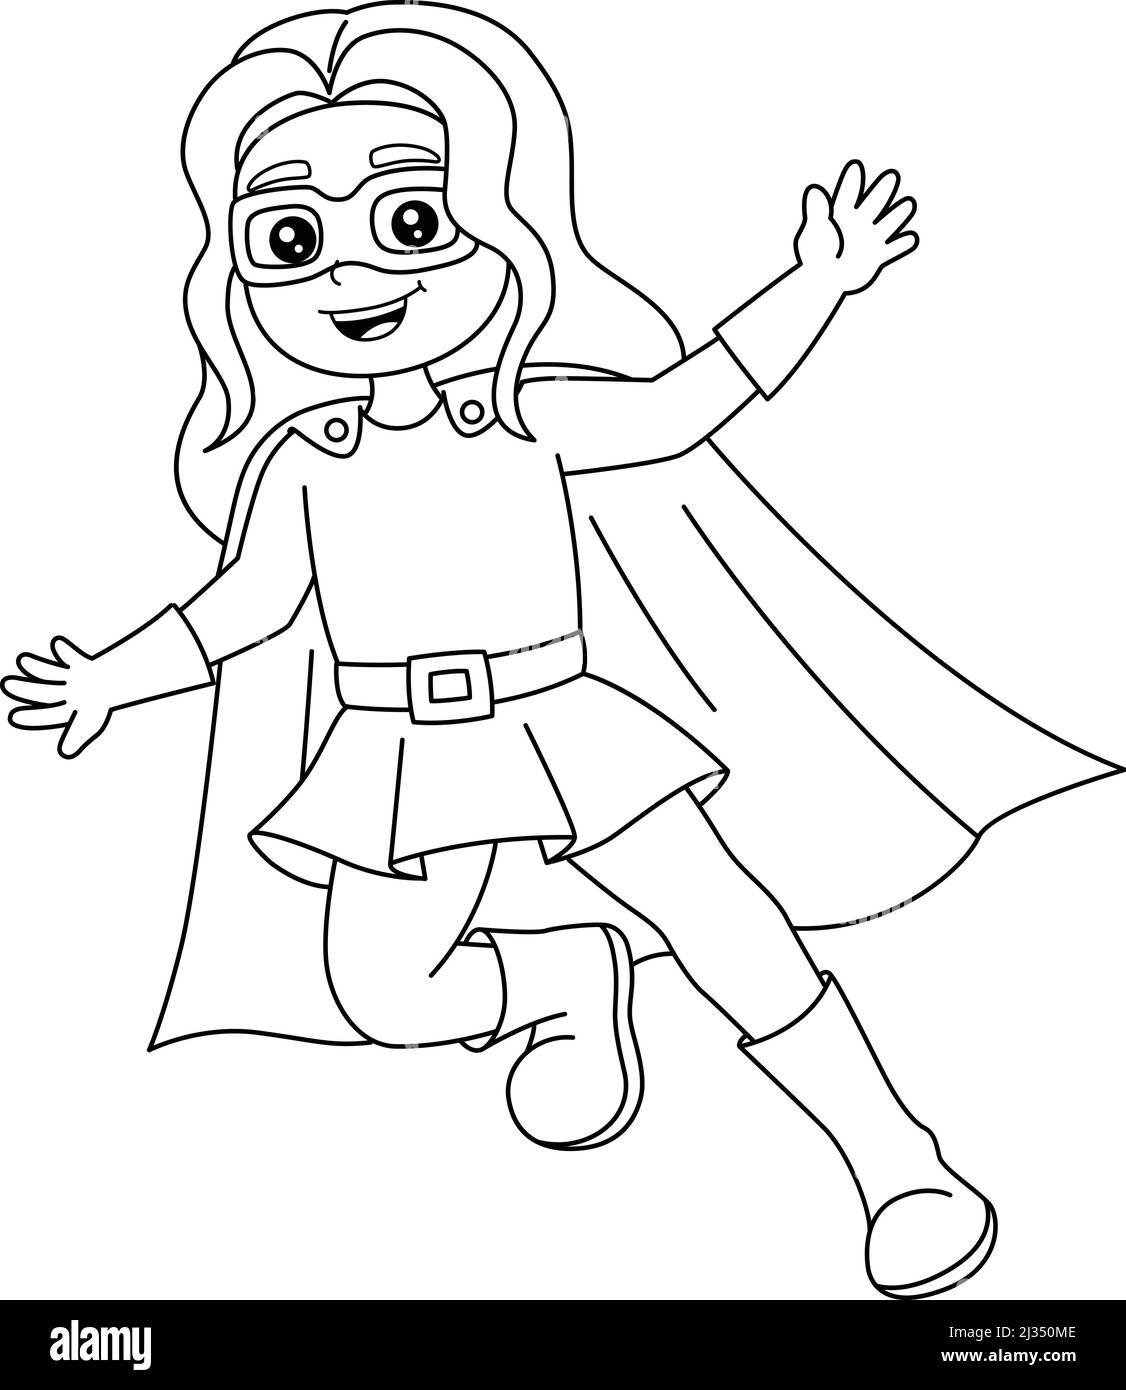 Superhero Girl Coloring Page Isolated for Kids Stock Vector